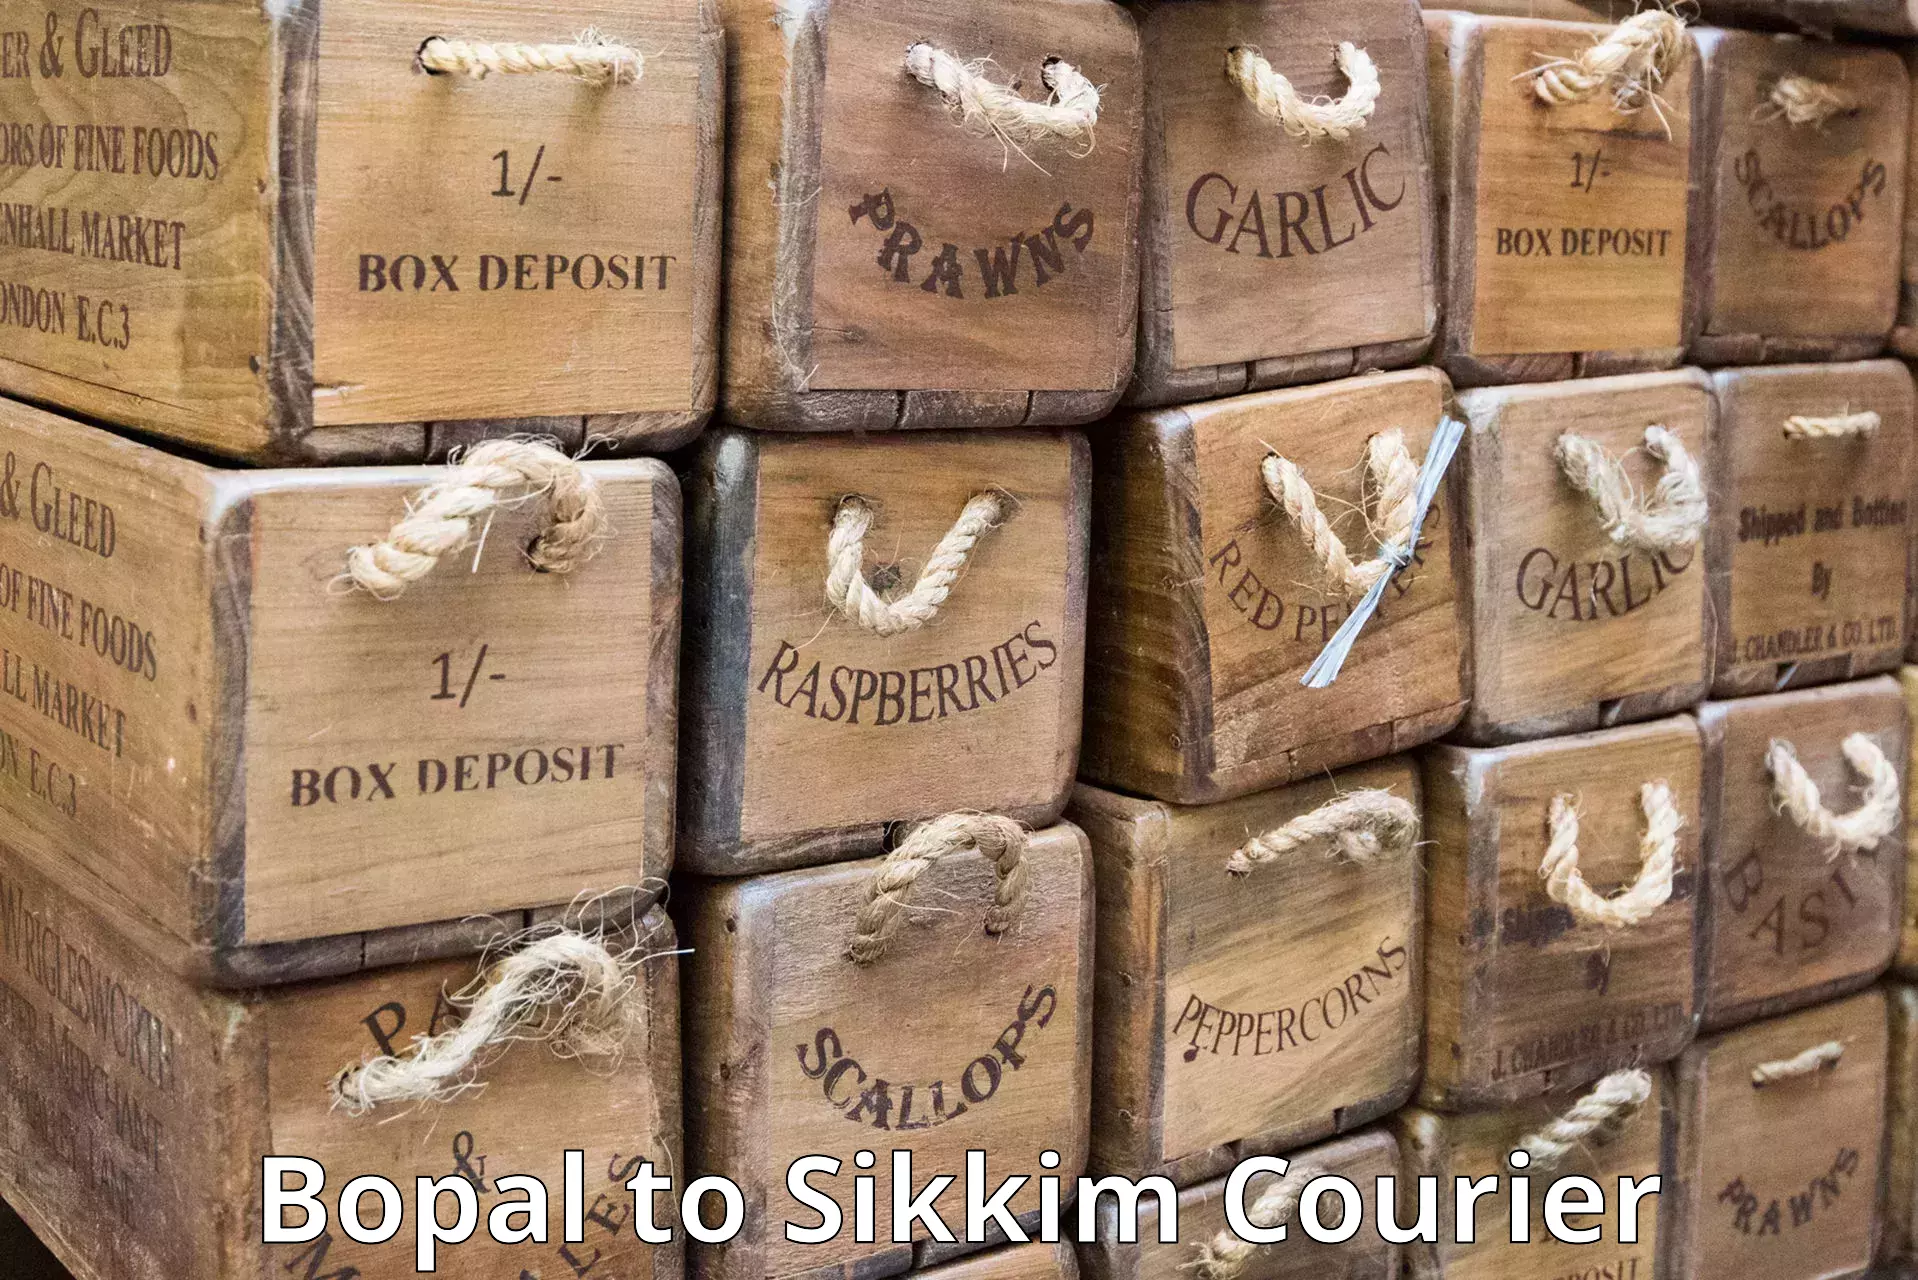 Seamless shipping service Bopal to North Sikkim